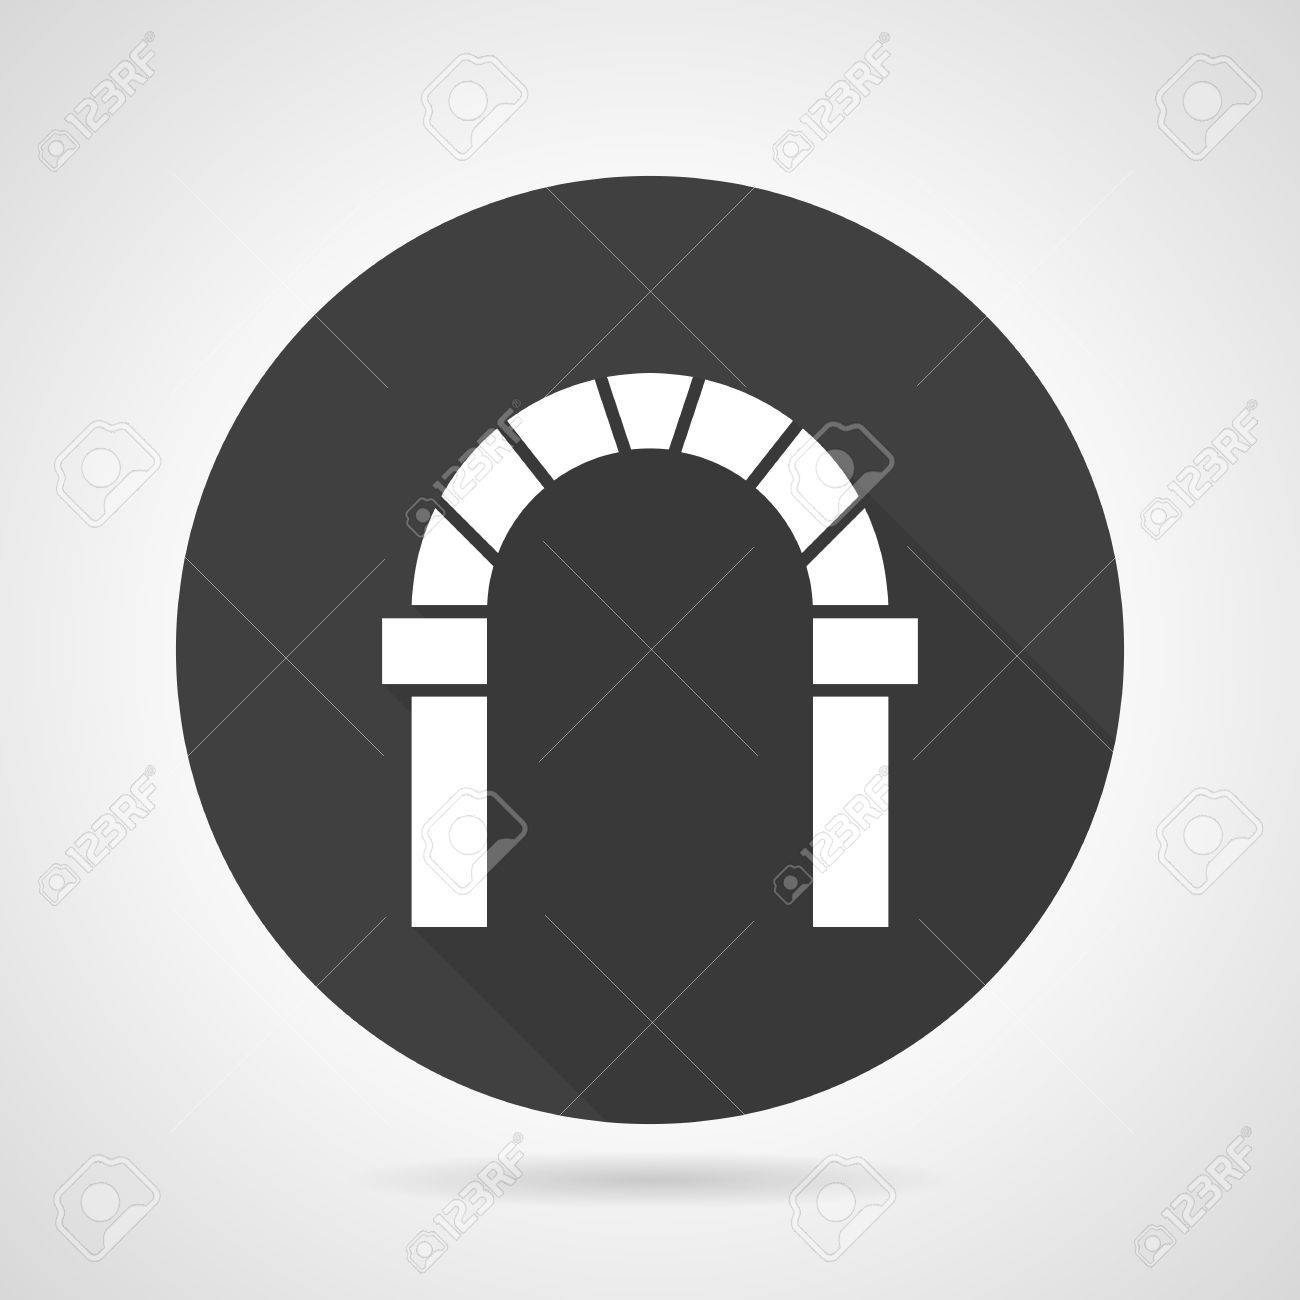 Flat Black Round Vector Icon With White Silhouette Curved Arch